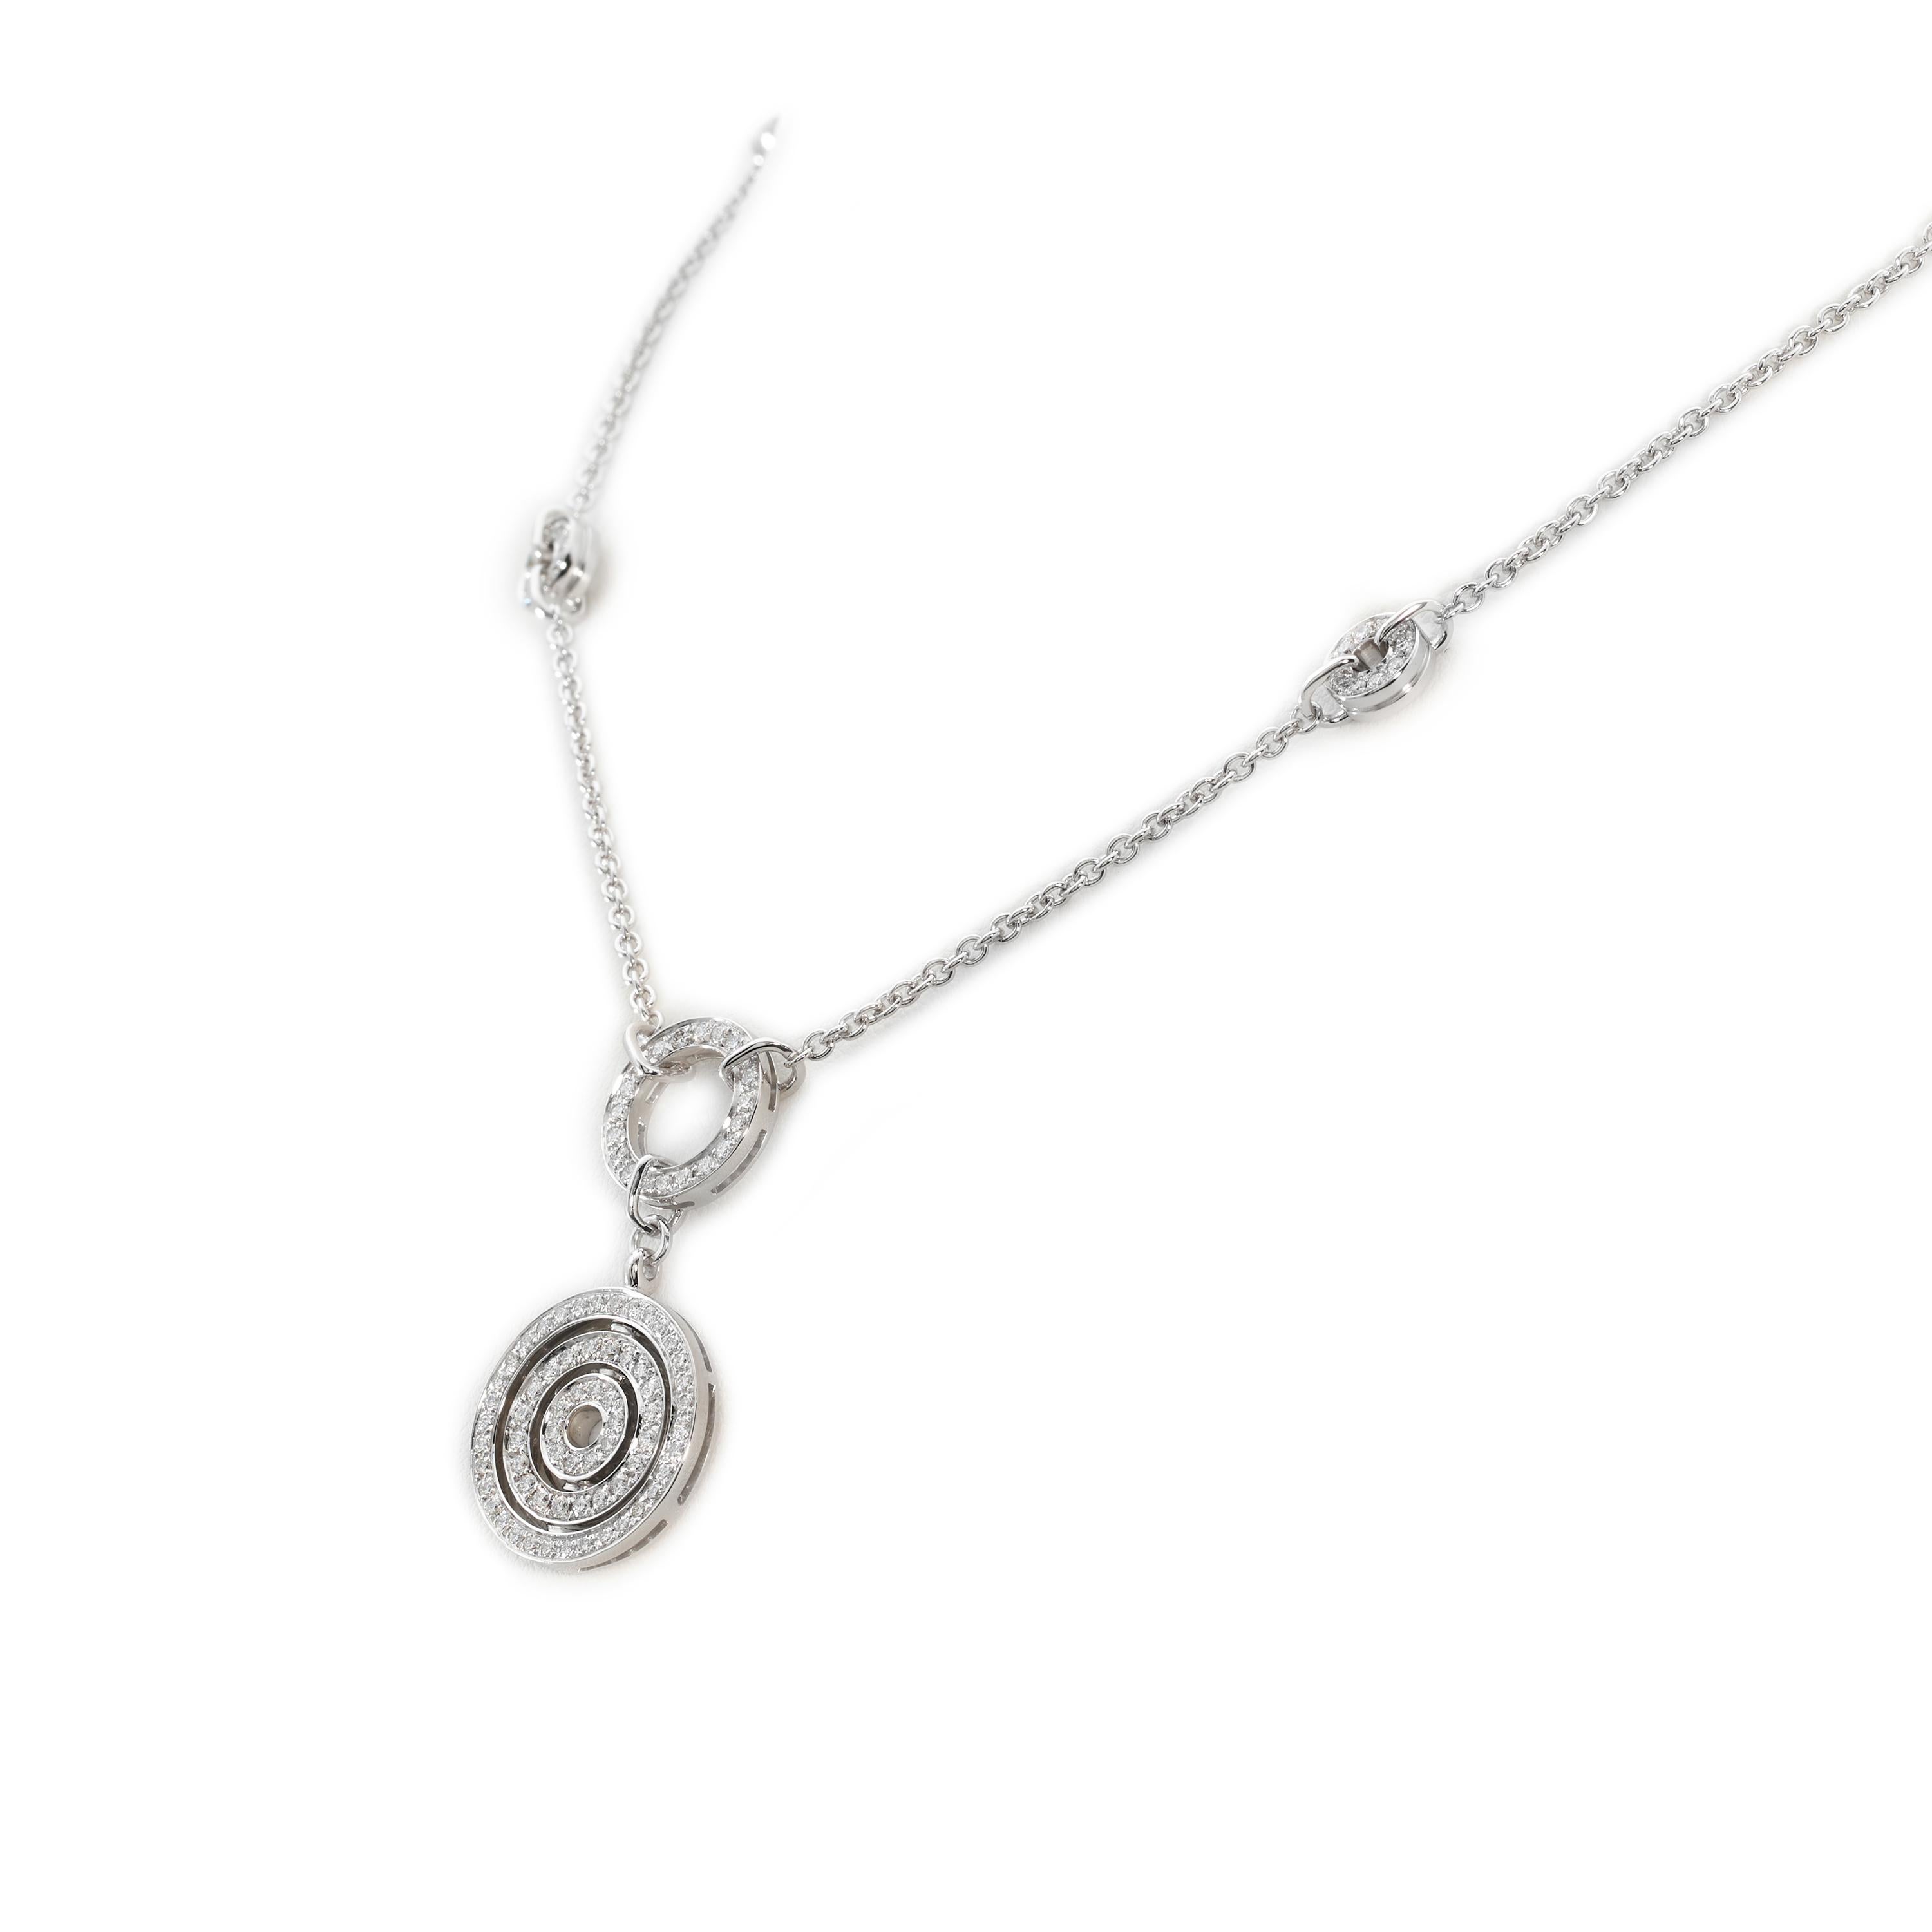 Authentic Bvlgari Astrale Cerchi Pendant necklace crafted in 18 karat white gold and set with glittering round brilliant cut diamonds.  The pendant is situated on an 18-inch adjustable chain, accented by four round diamond-set stations for an